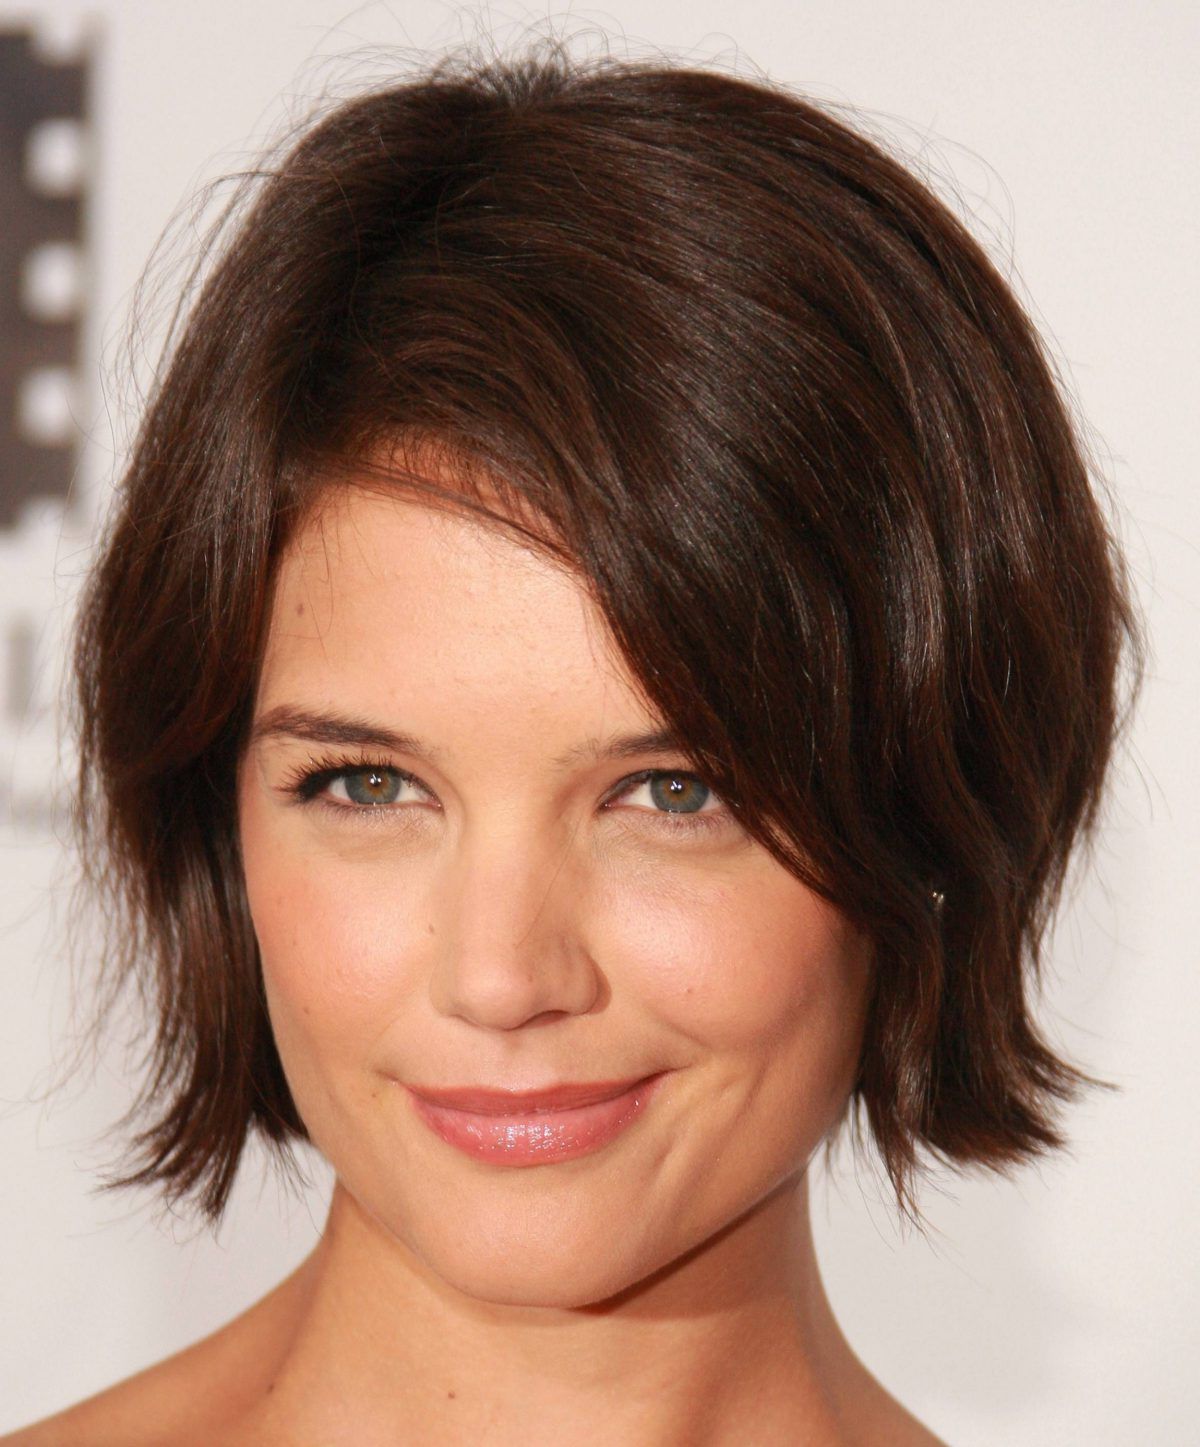 Best Short Hairstyles – Cute Hair Cut Guide For Round Face Shape Pertaining To Short Hairstyles For Women With A Round Face (View 9 of 25)